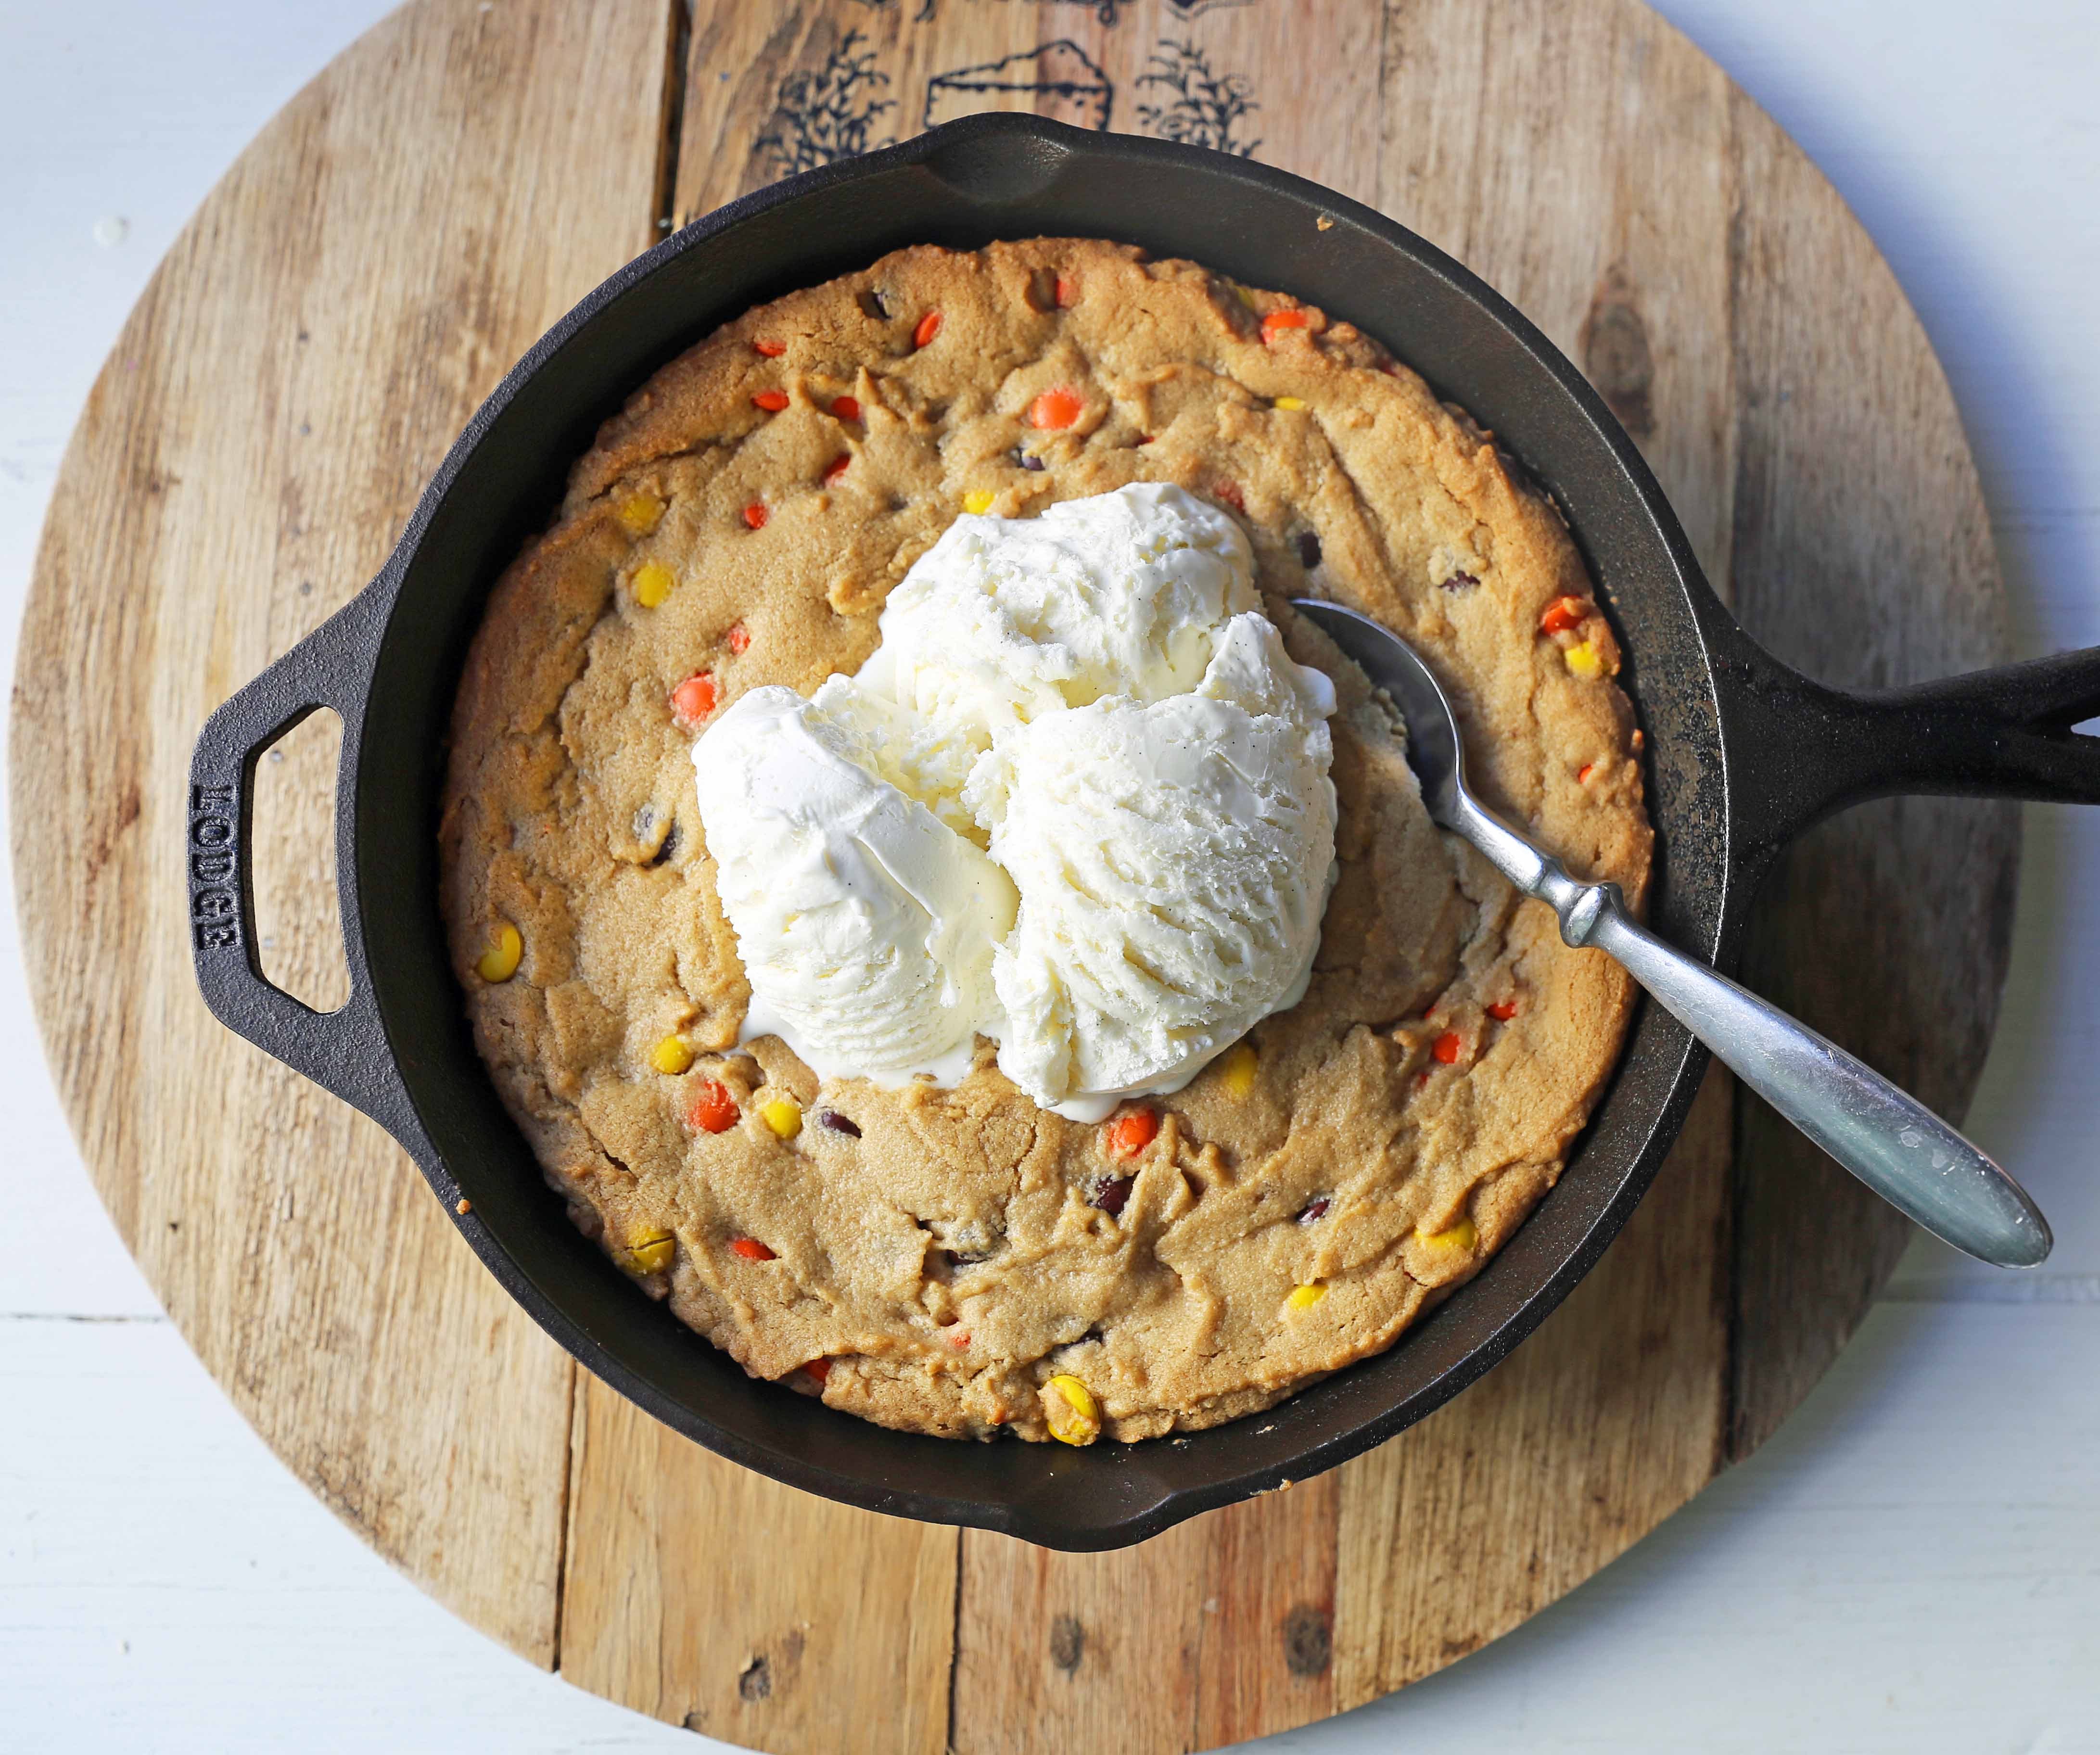 Peanut Butter Skillet Cookie. Homemade peanut butter cookie dough with Reeses Pieces baked until ooey gooey and topped with vanilla ice cream and hot fudge. www.modernhoney.com #peanutbutter #peanutbuttercookies #peanutbutterpizookie #pizookie 